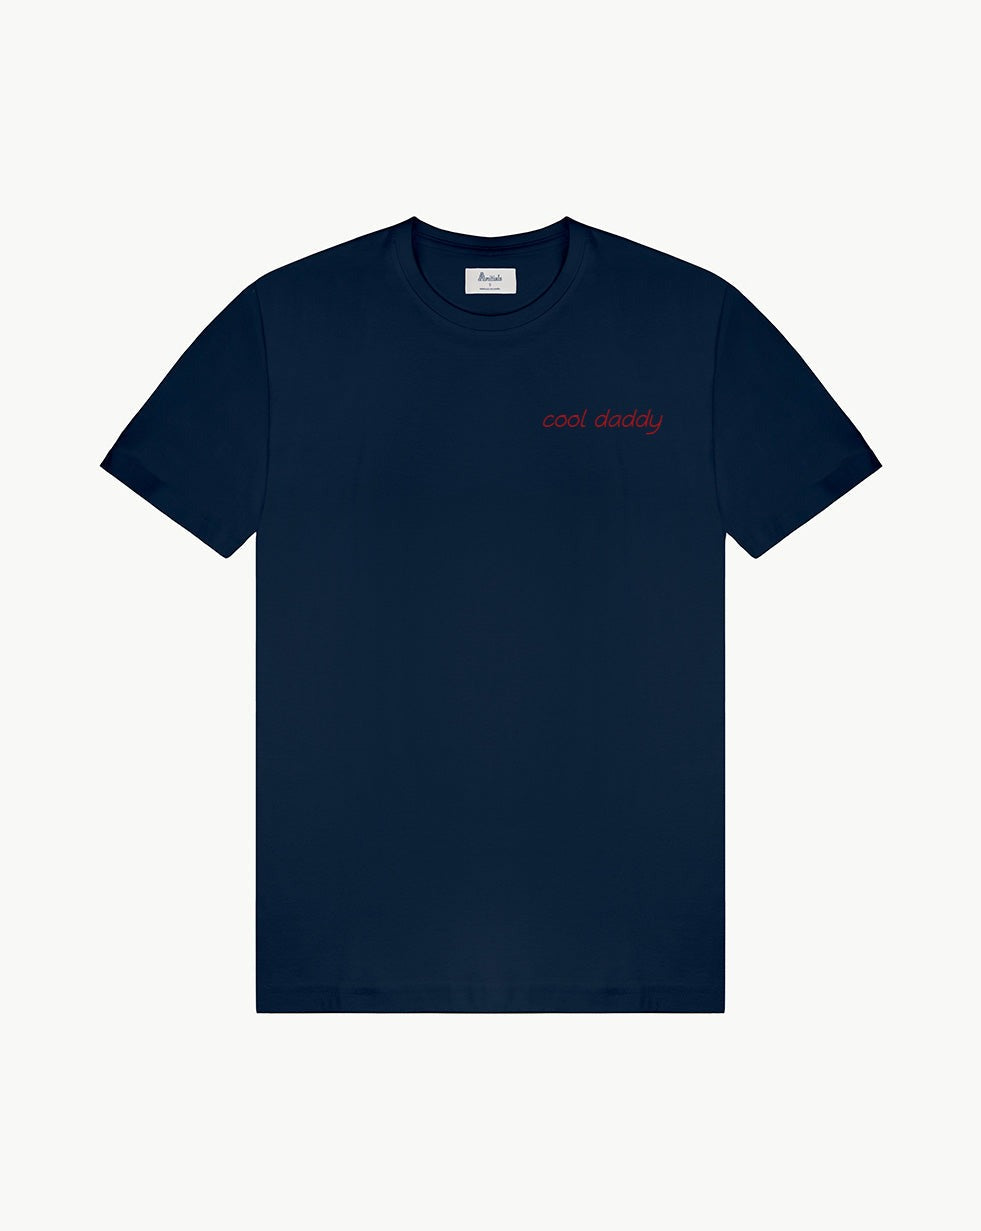 NAVY BLUE T-SHIRT "cool daddy"